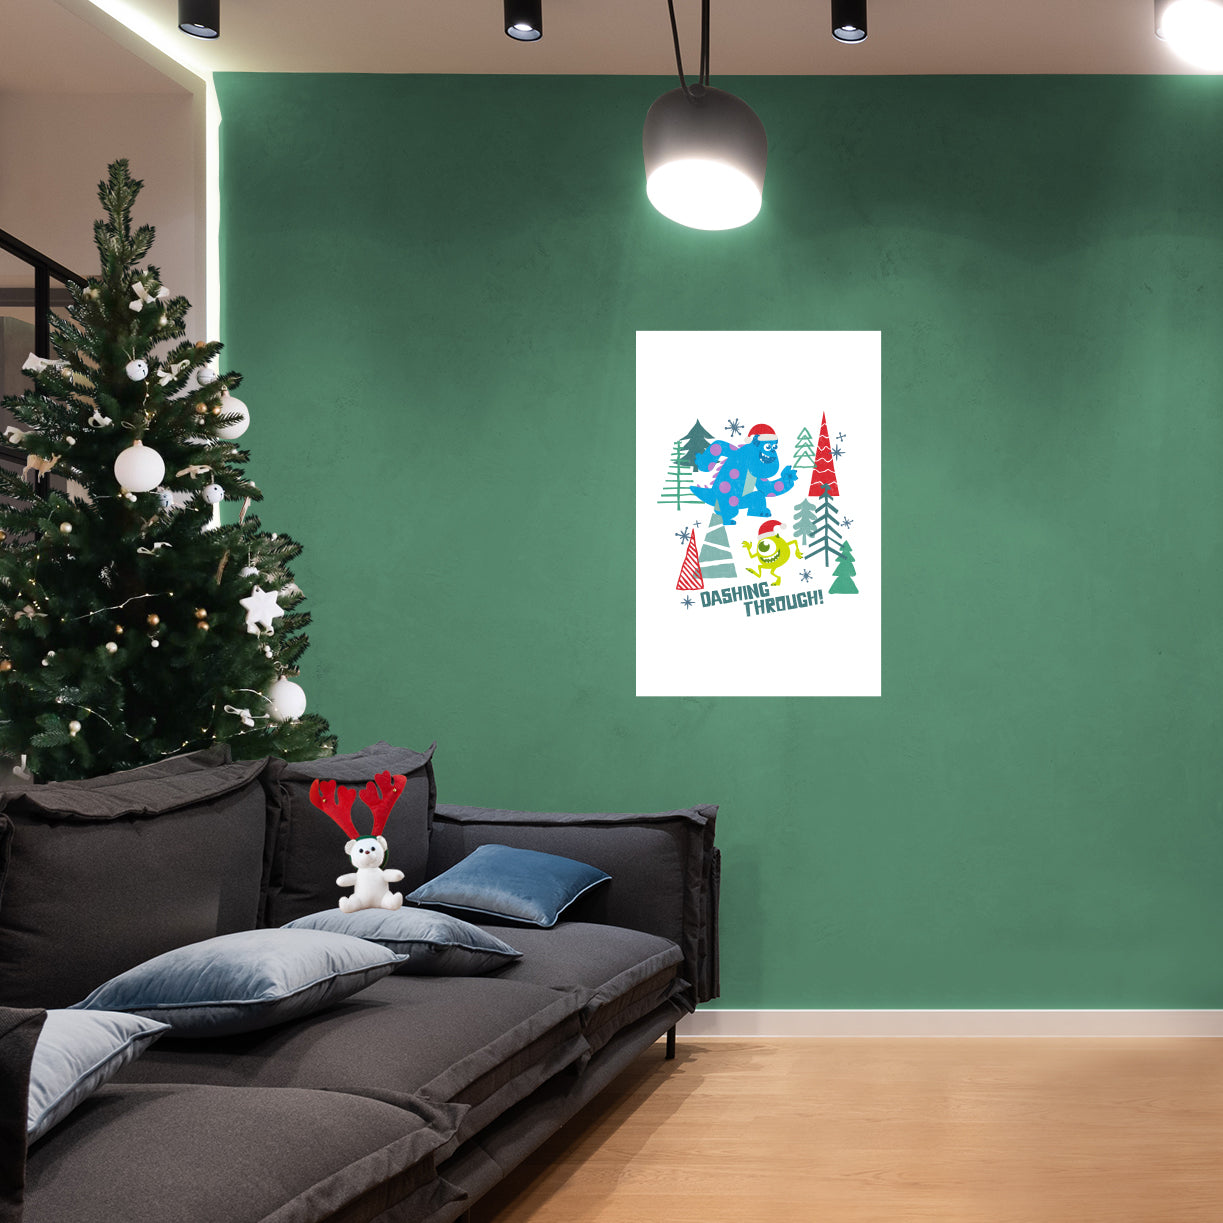 Monsters Inc Festive Cheer: Sulley & Mike Dashing Through Mural        - Officially Licensed Disney Removable     Adhesive Decal